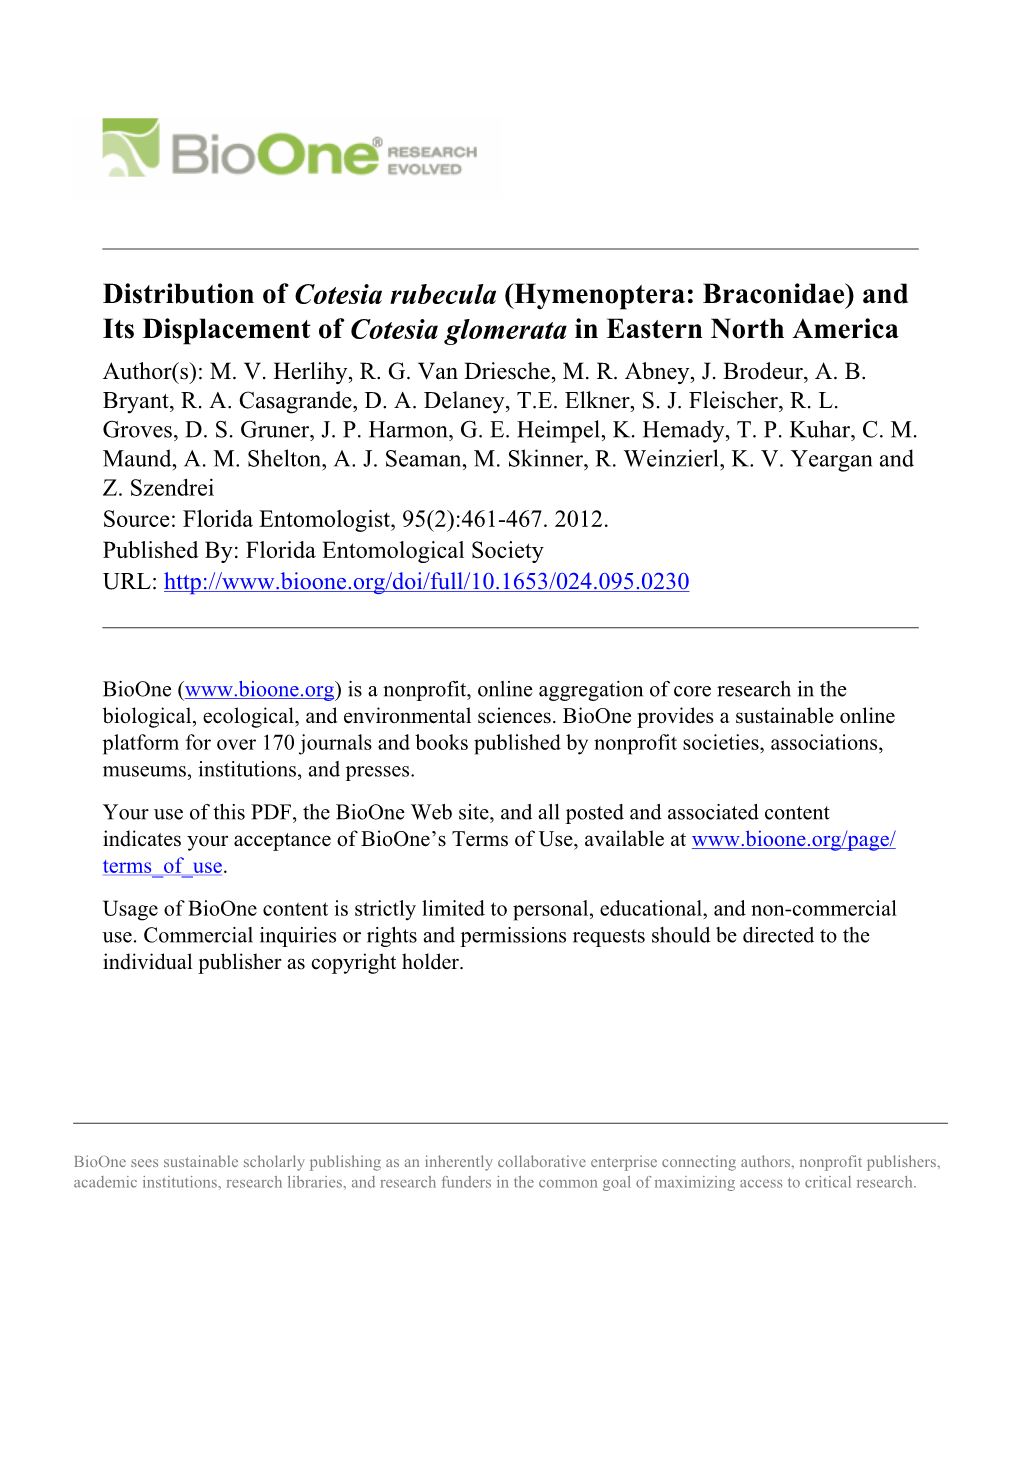 Distribution of Cotesia Rubecula (Hymenoptera: Braconidae) and Its Displacement of Cotesia Glomerata in Eastern North America Author(S): M